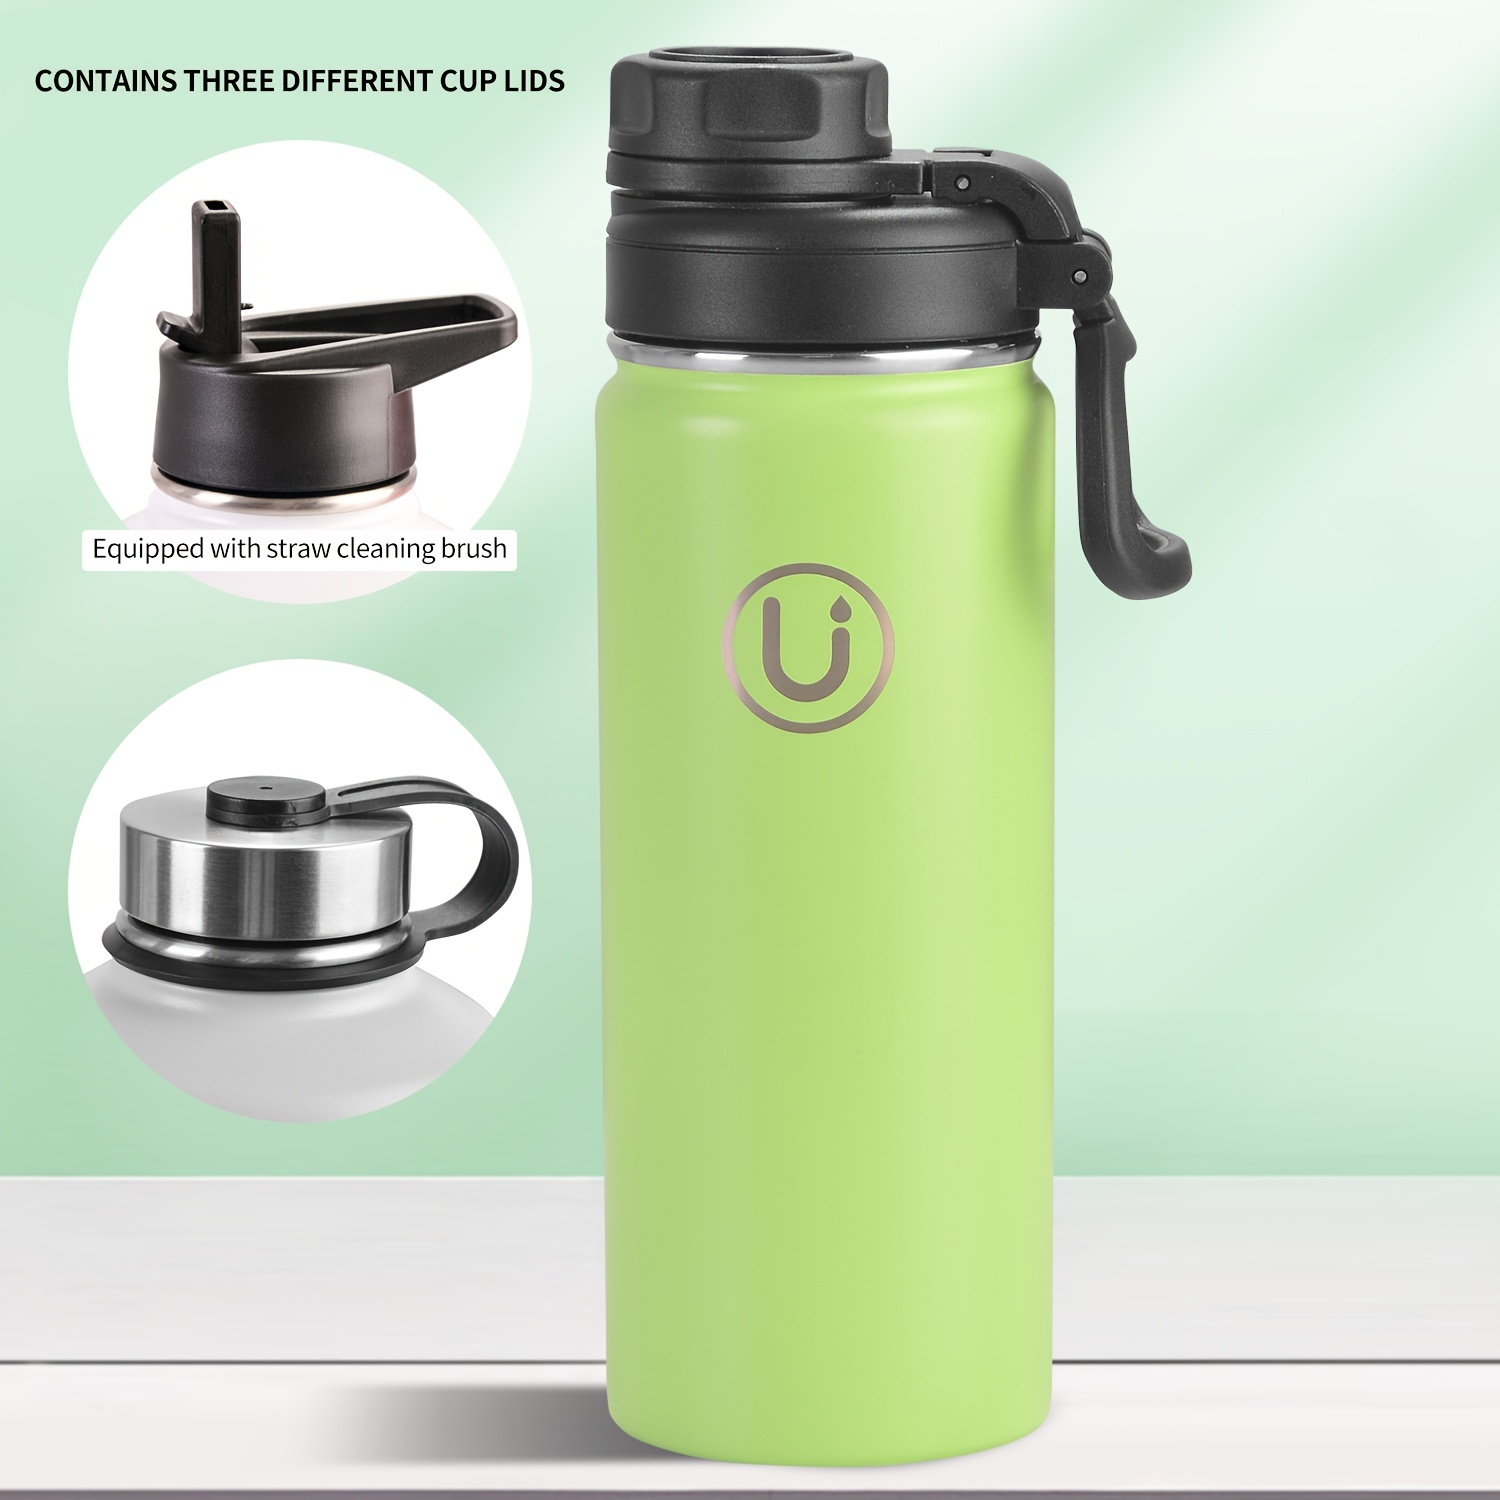 Triple Insulated Stainless Steel Water Bottle with Straw Lid